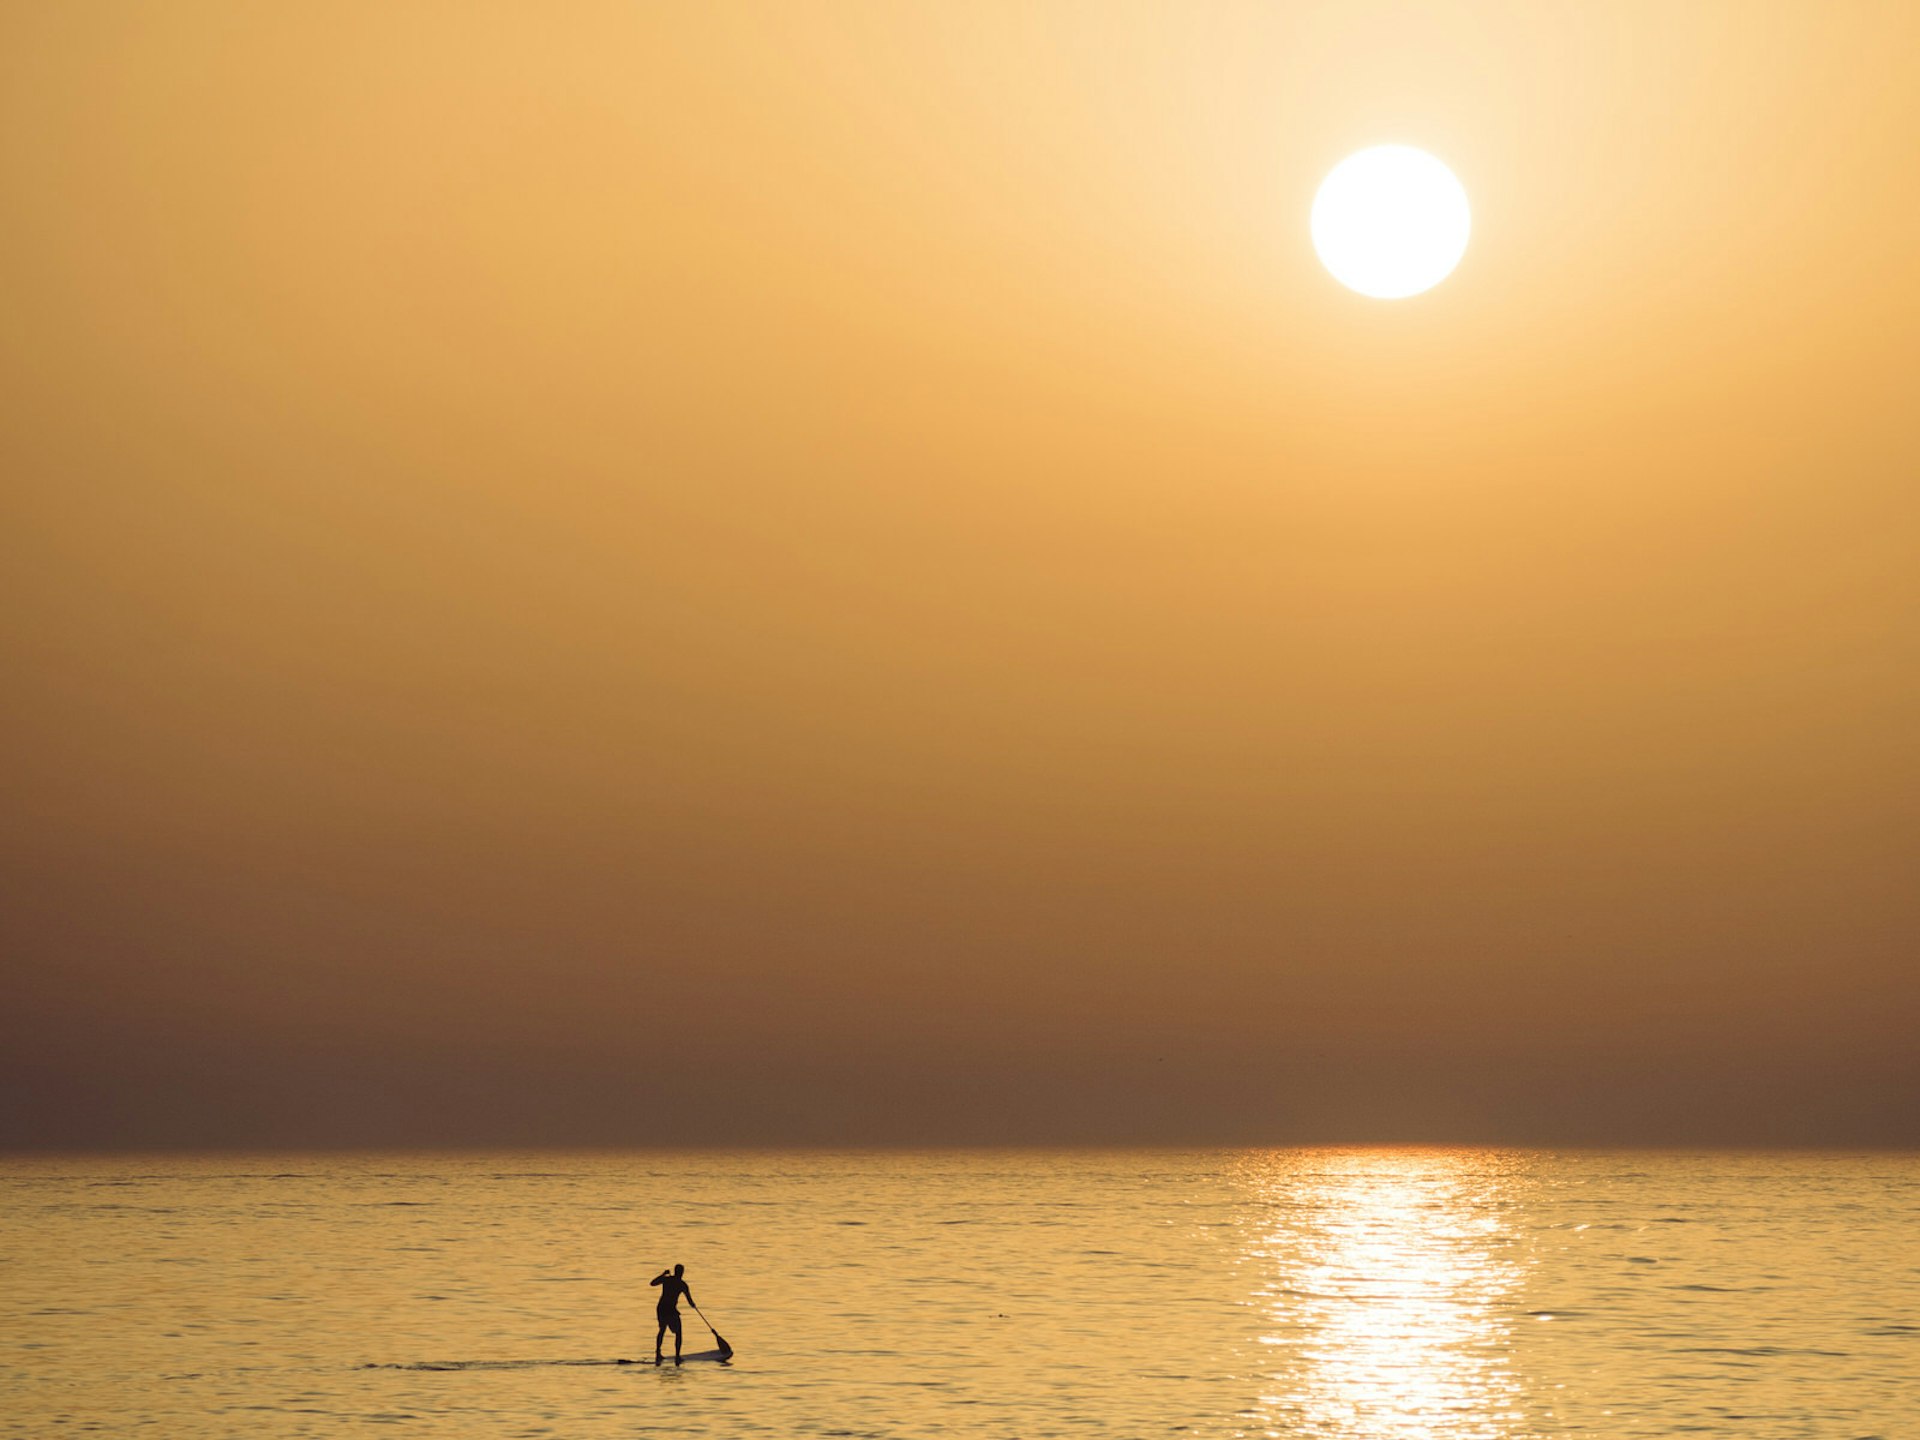 A lone standup paddler in the sea by sunset in Dubai © Miemo Penttinen - miemo.net / Getty Images